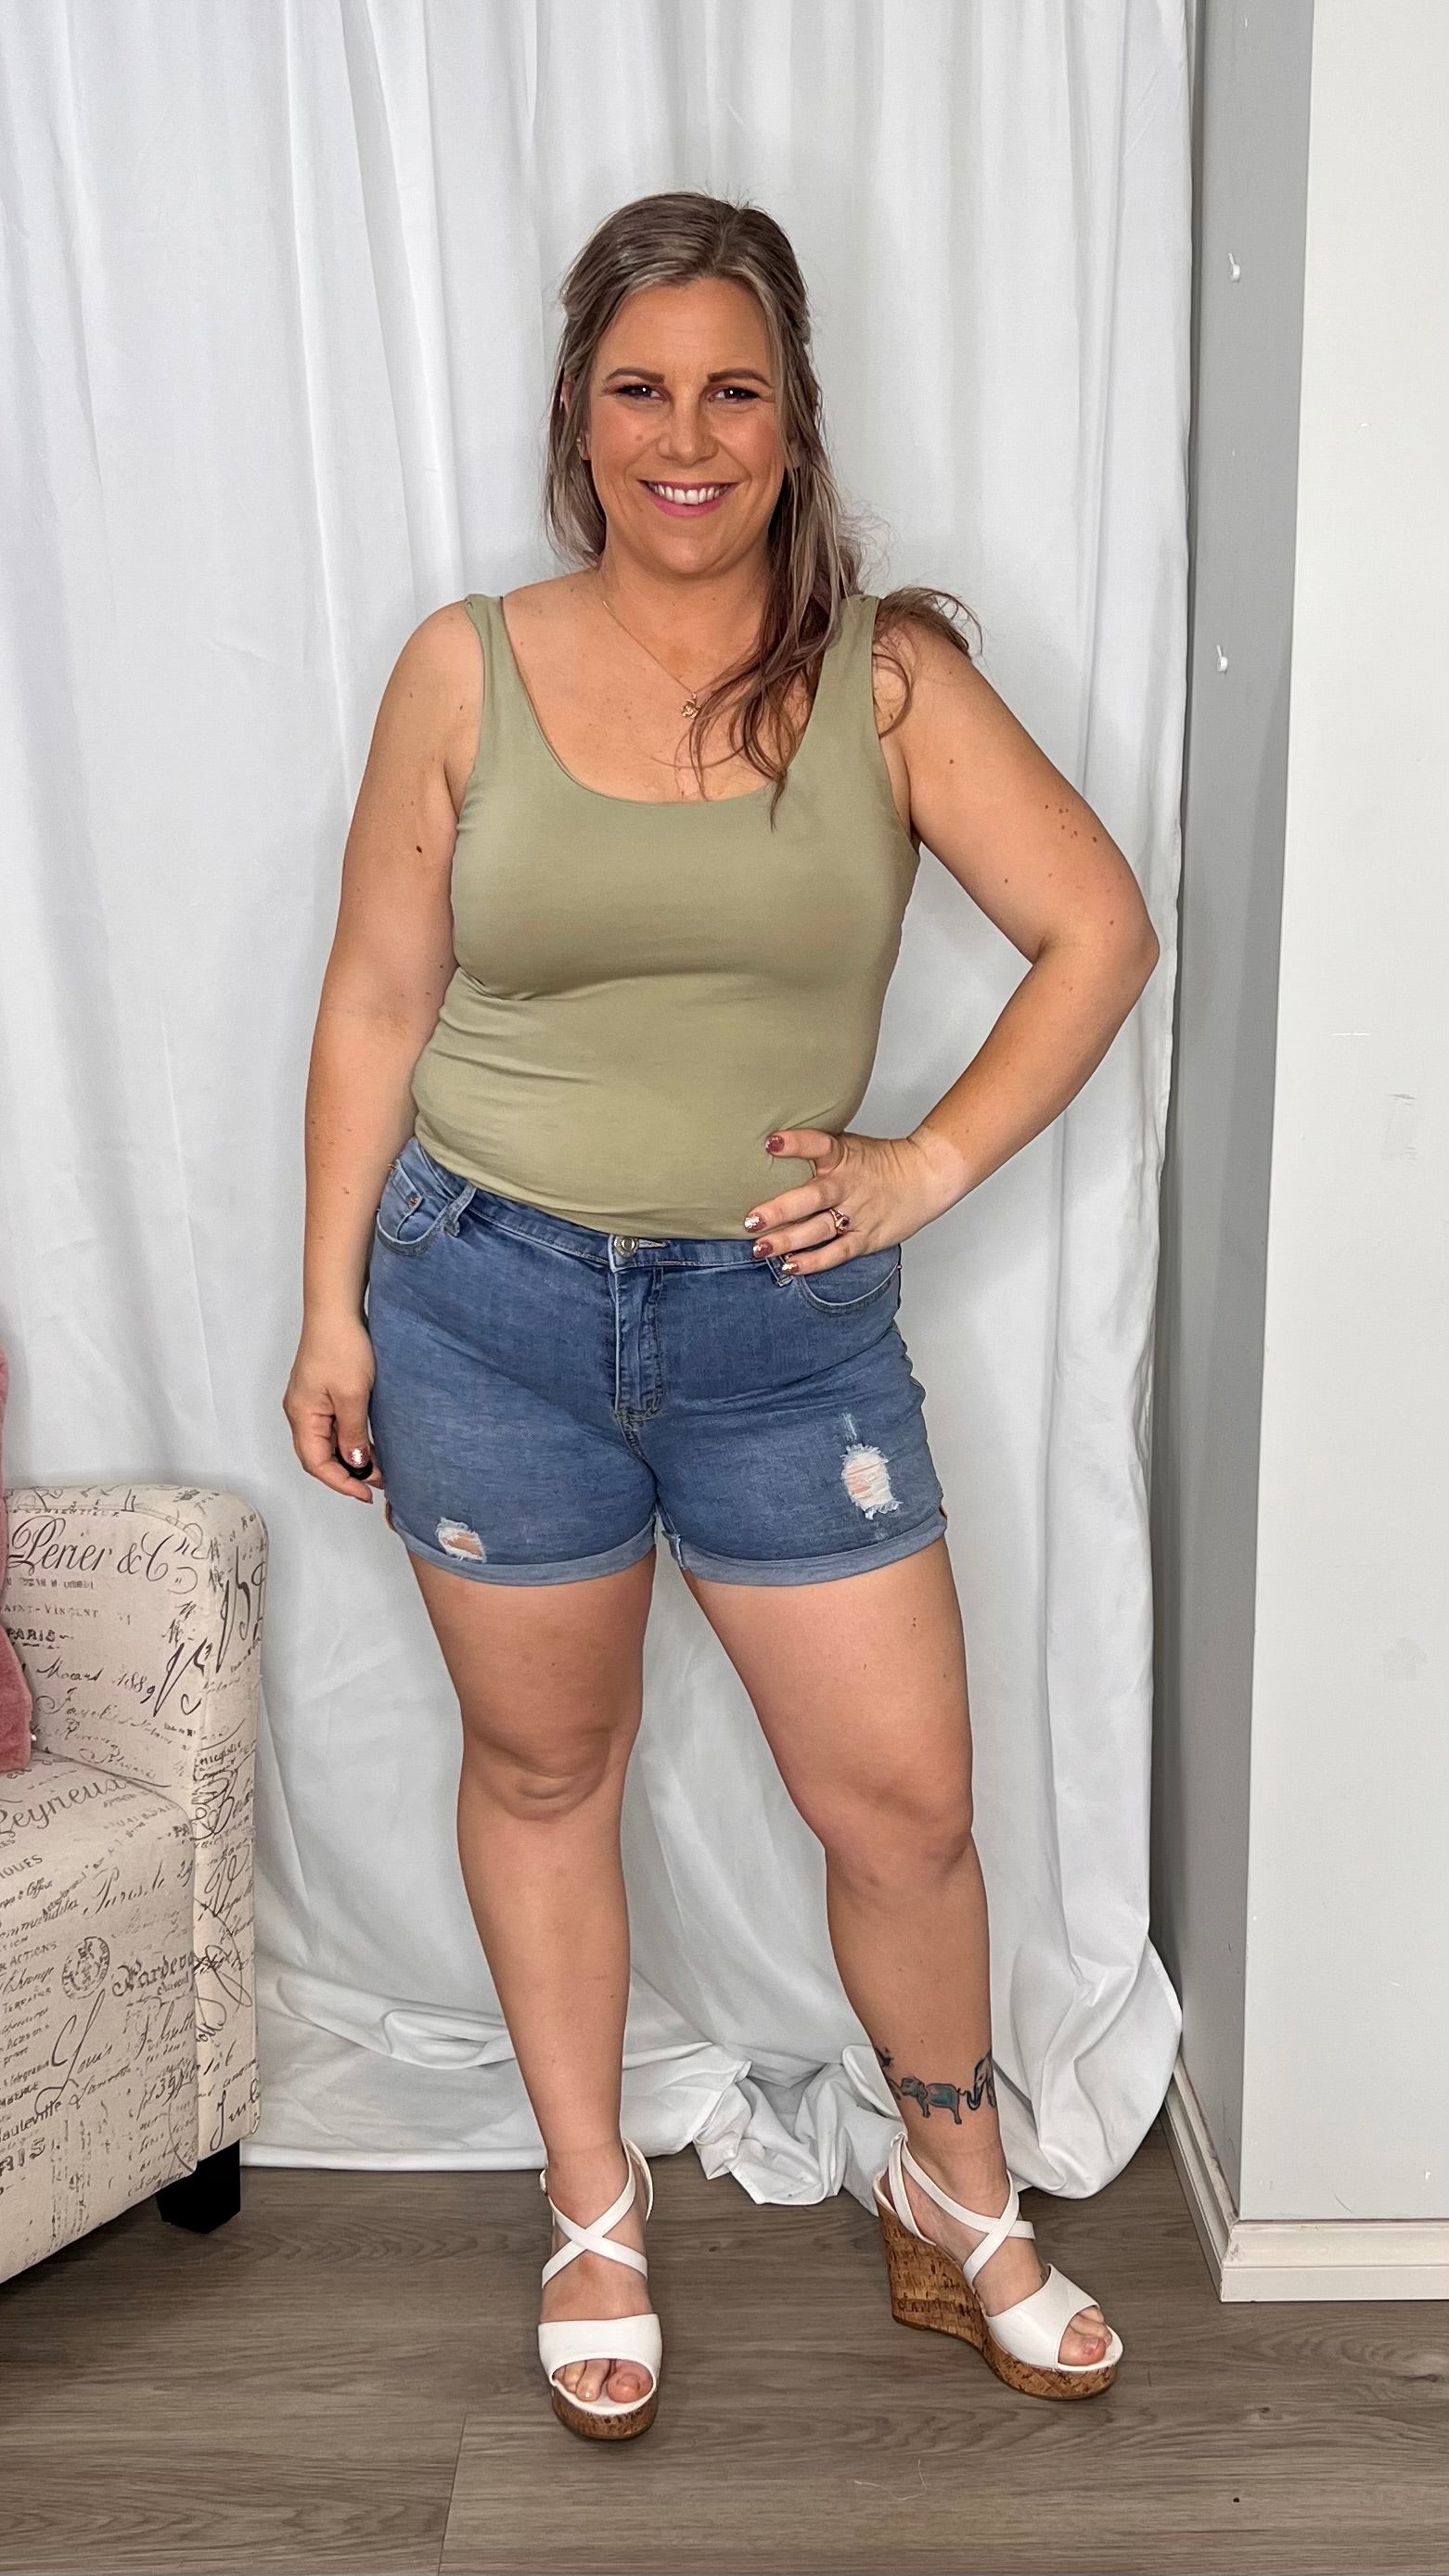 Cassie Singlet Tank: Introducing the Cassie Singlet. From errands to "out”, this singlet's stylish and sassy design shows off your curves without skimping on comfiness. A basic that pack - Ciao Bella Dresses 